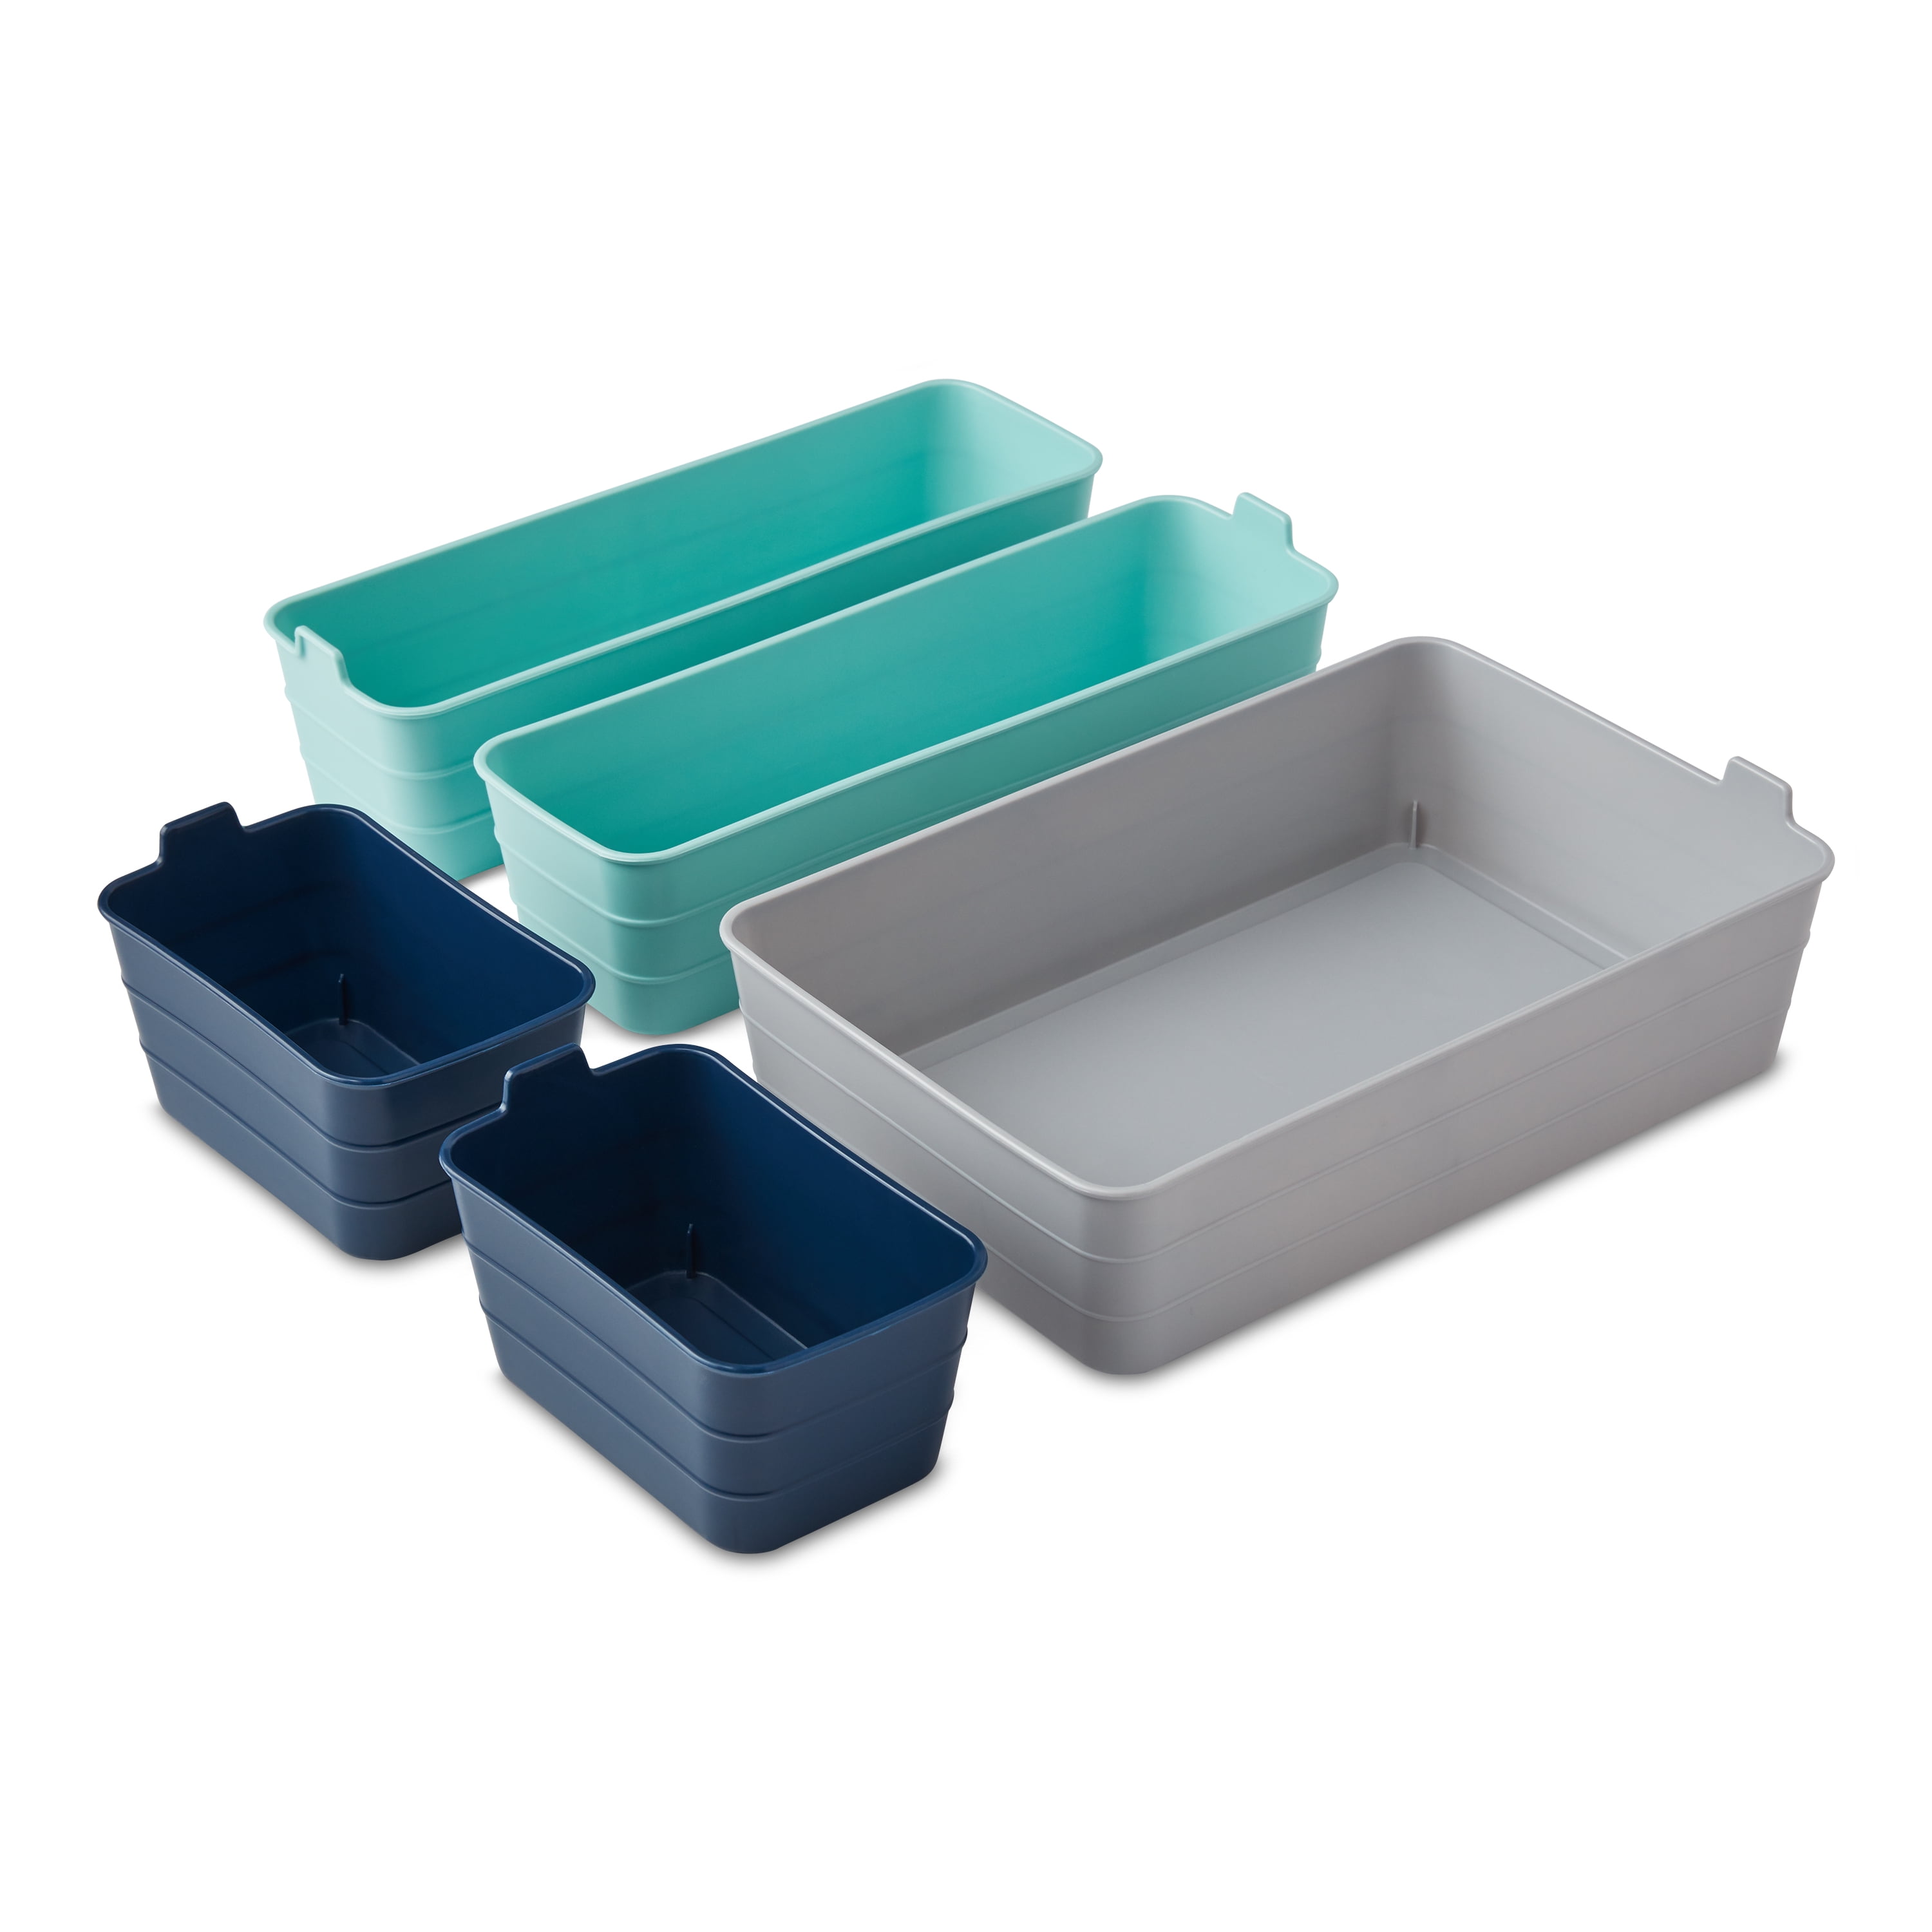 Mainstays Set of 5 Flexible Drawer Storage Organizers, Navy Teal Gray, case  pack 4 